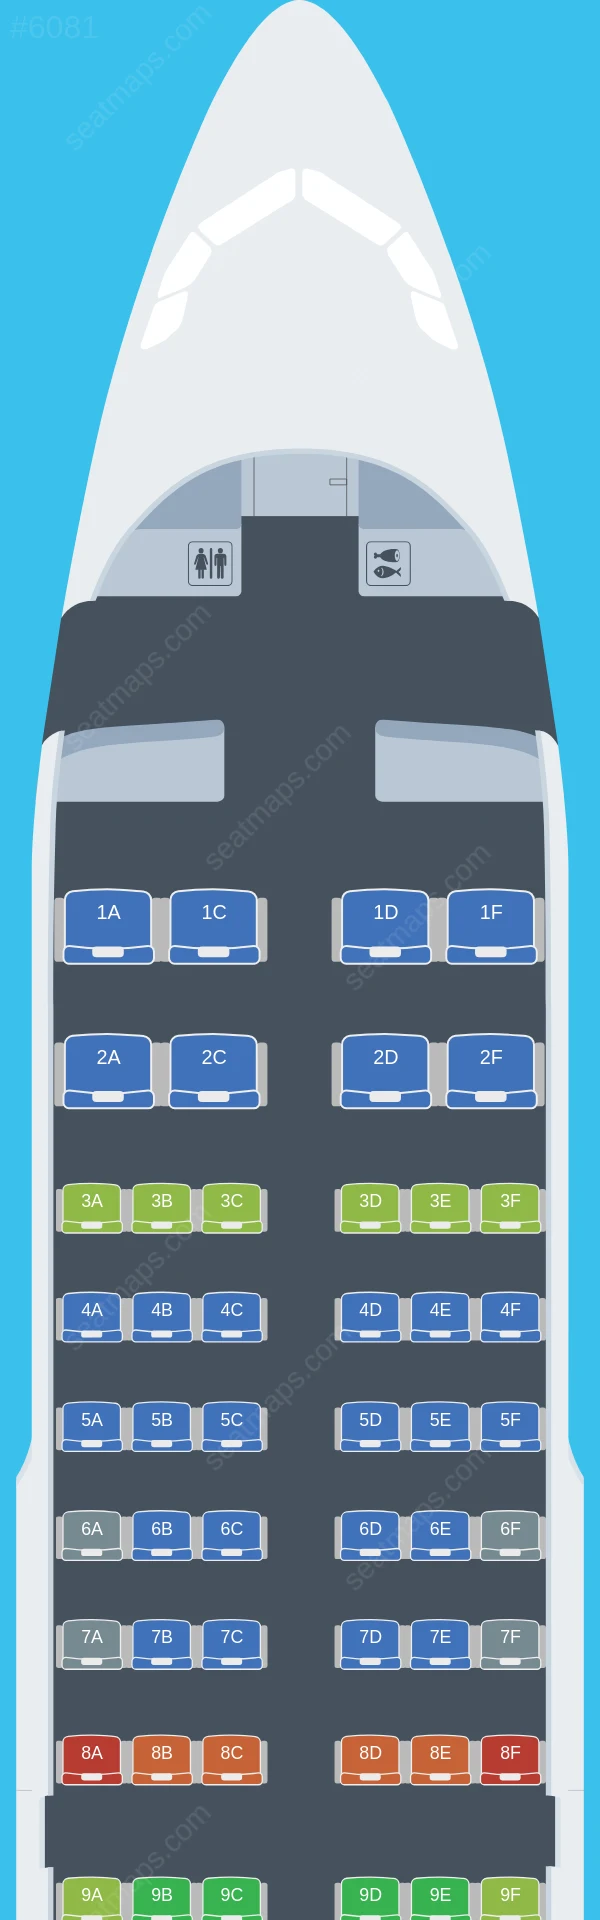 Rossiya Airbus A319-100 seatmap preview